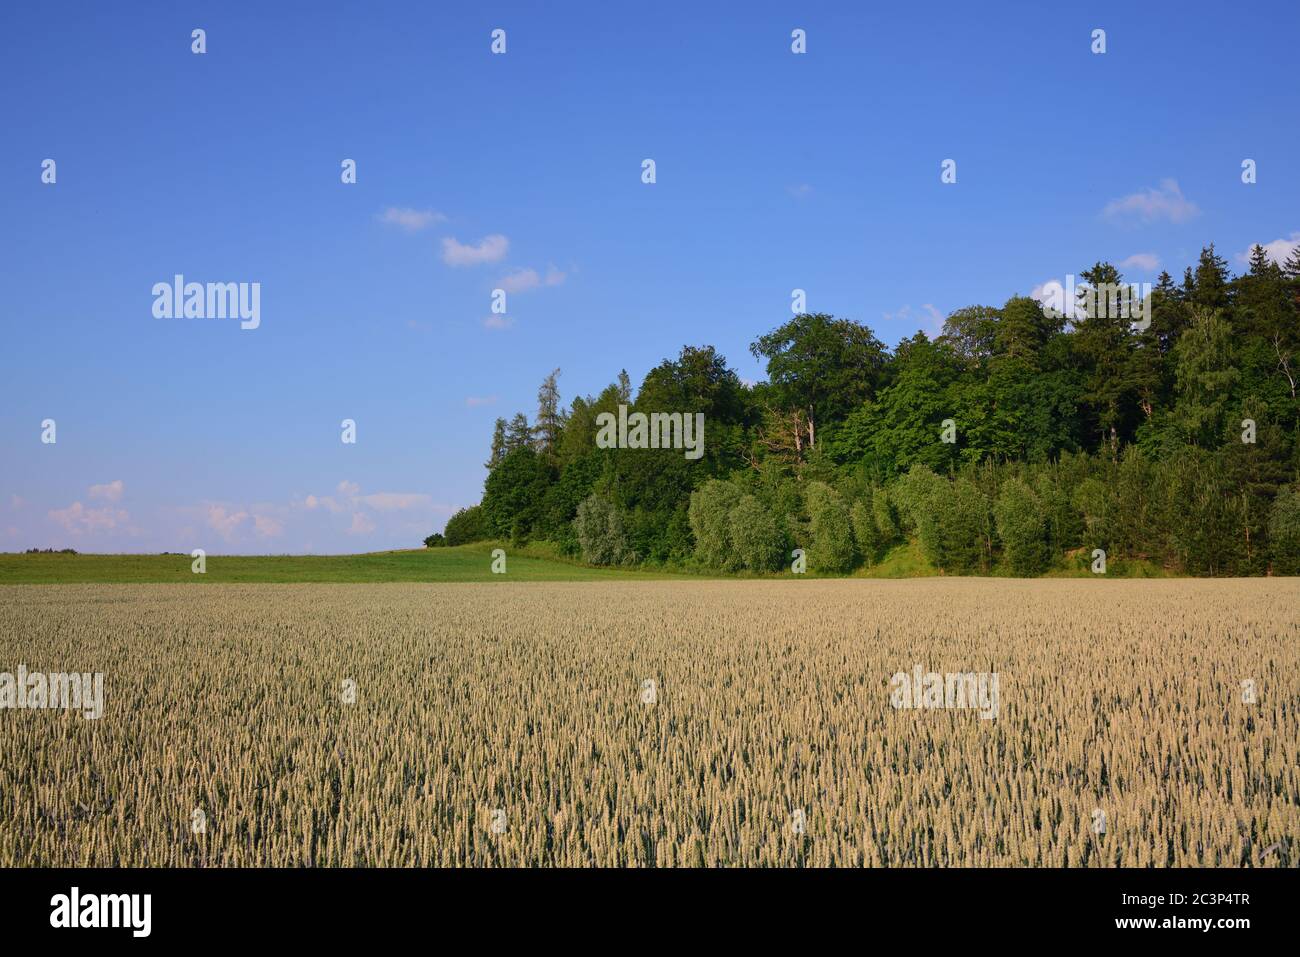 Romantic landscape with a ripe grain field in front of trees and a blue sky Stock Photo